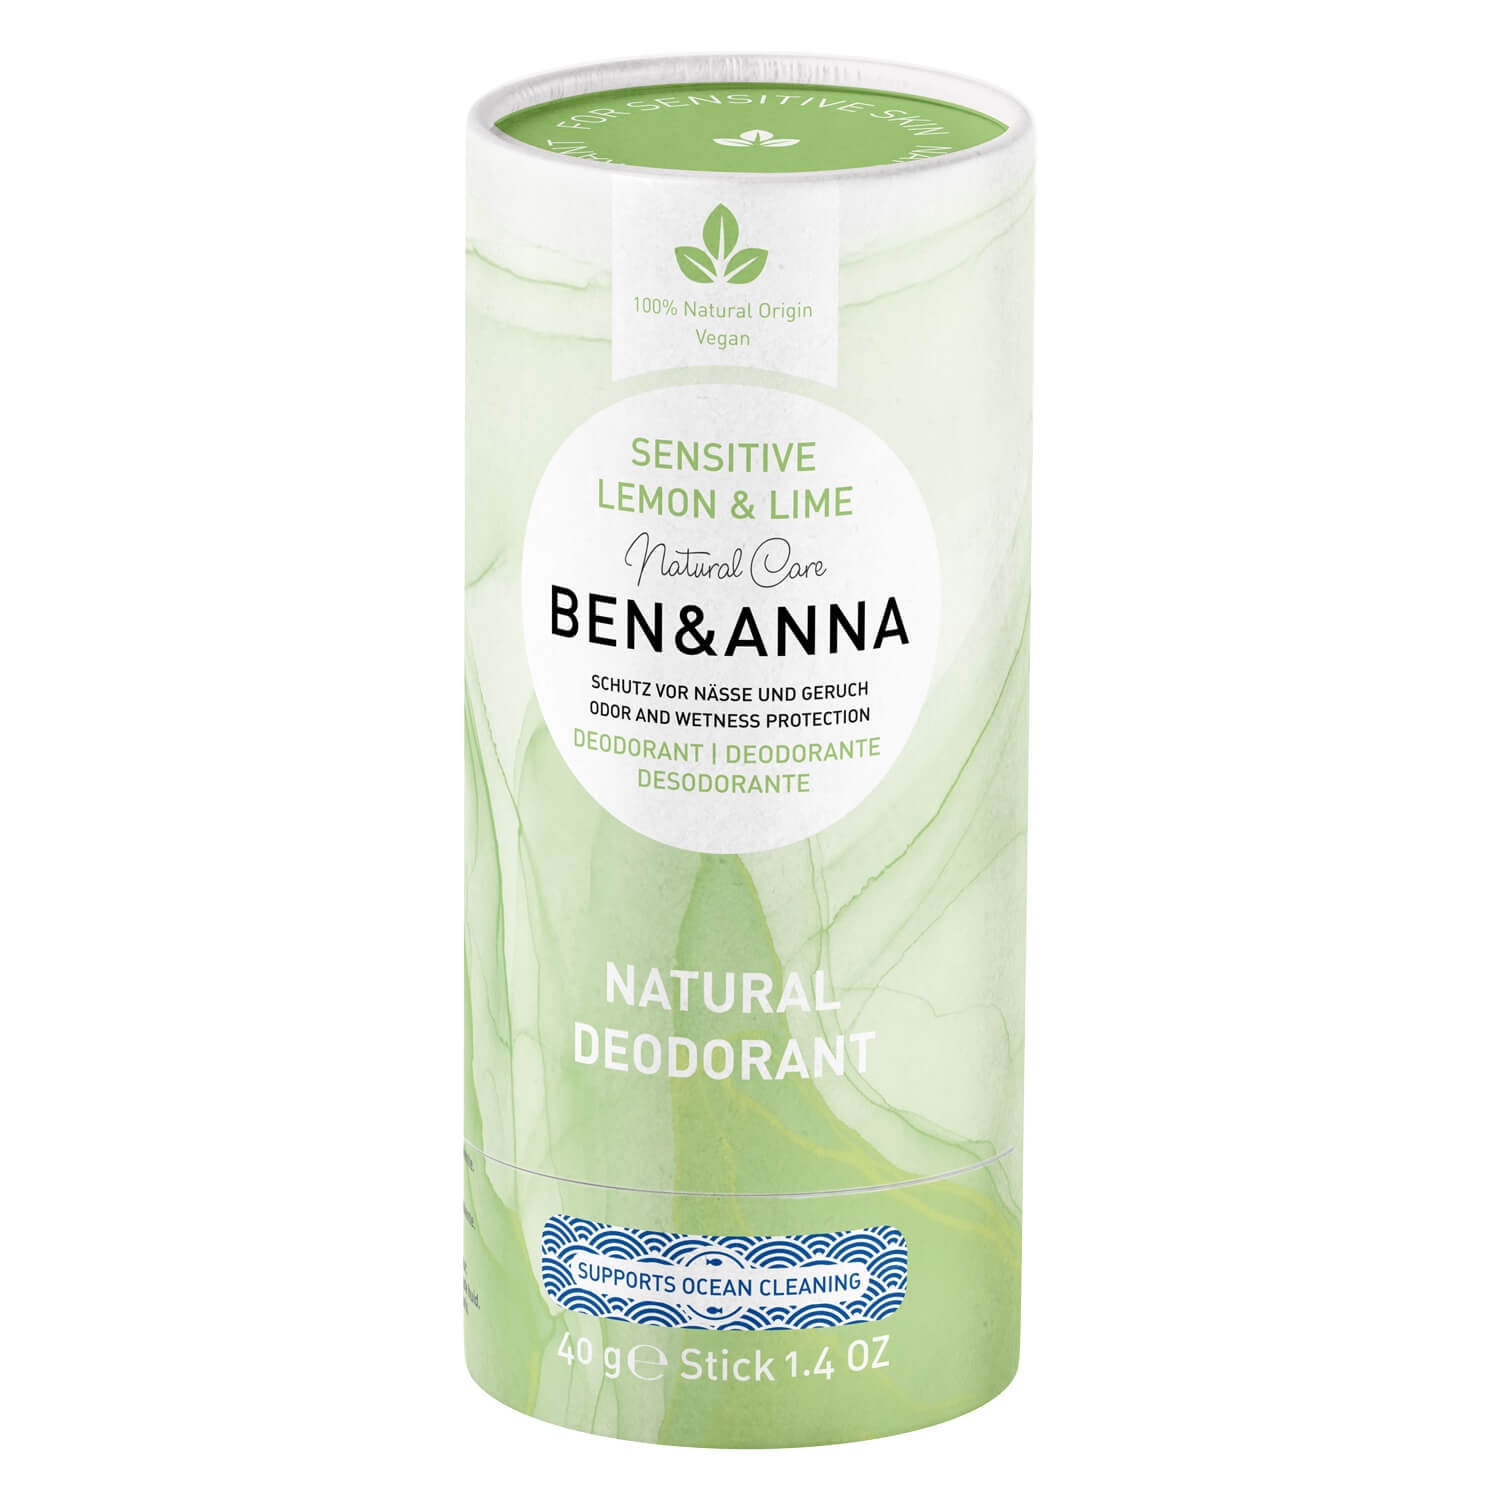 Product image from BEN&ANNA - Sensitive Lemon & Lime Natural Deo